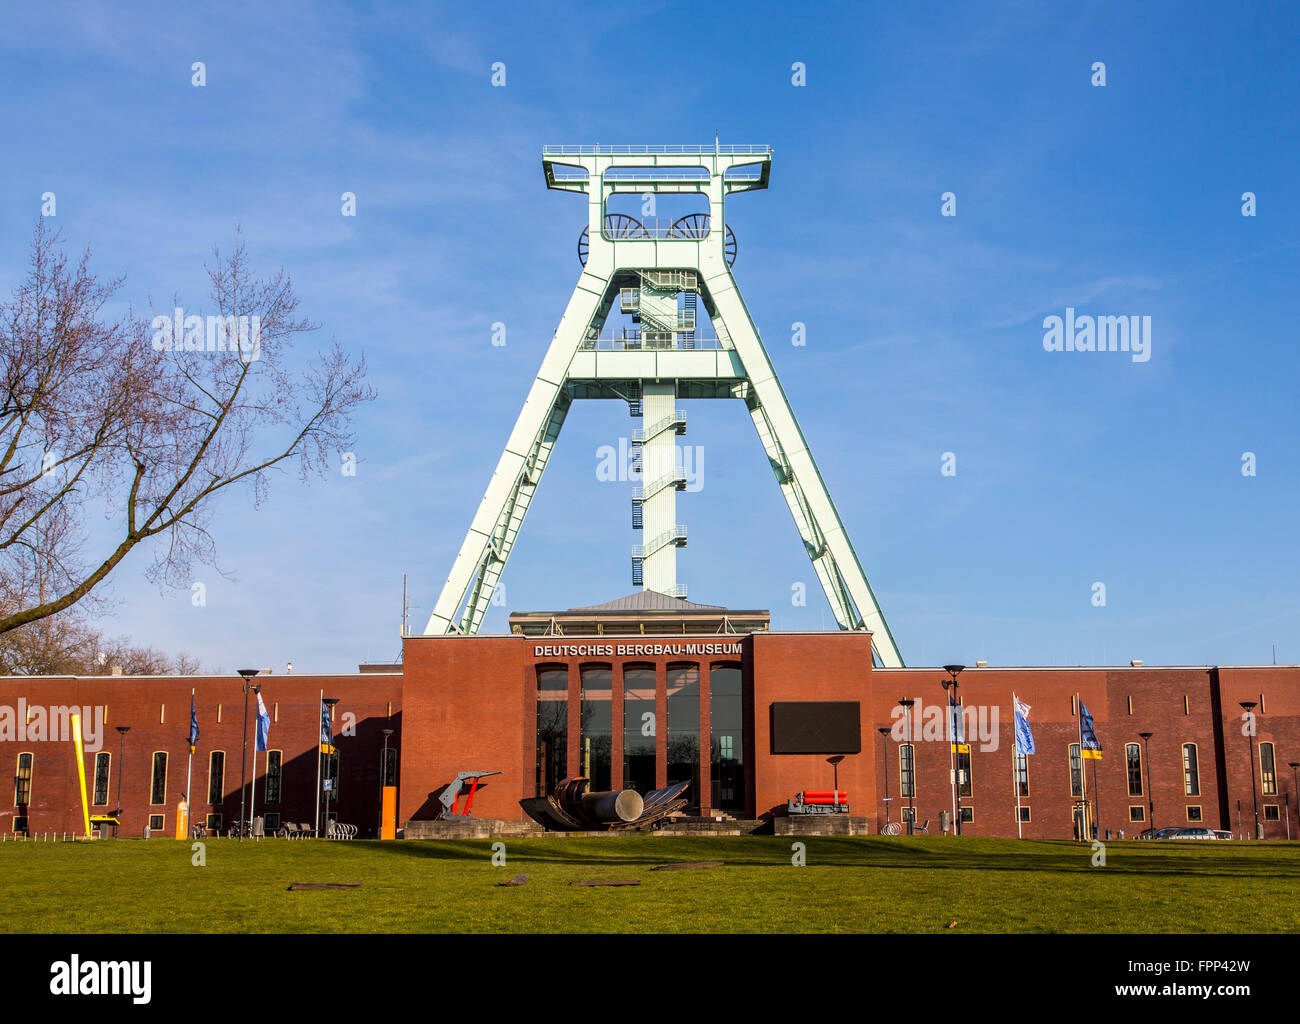 German mining museum in Bochum, Germany, largest mining museum in the world, pithead gear over the museum, Stock Photo